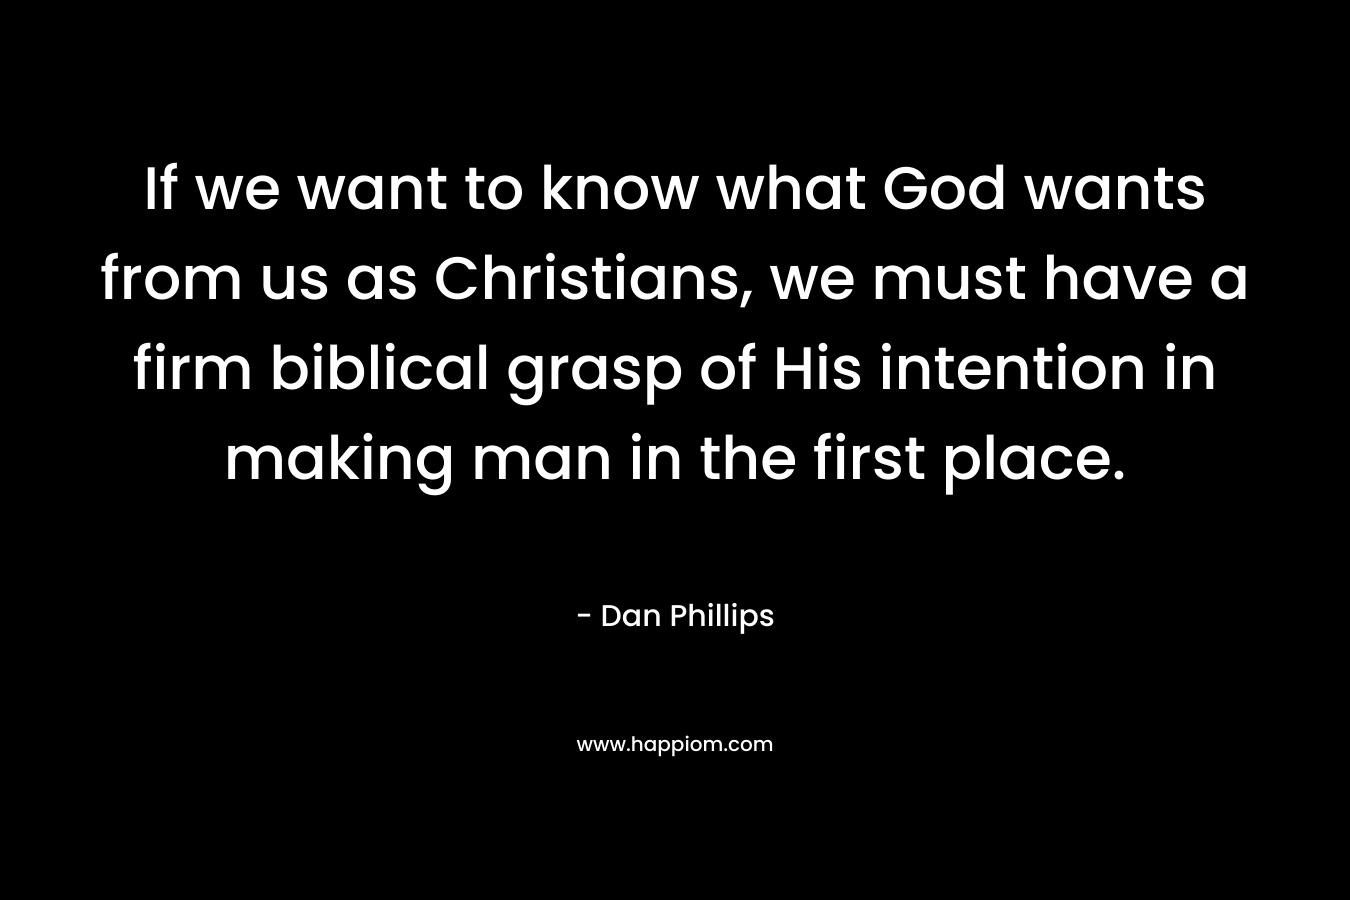 If we want to know what God wants from us as Christians, we must have a firm biblical grasp of His intention in making man in the first place. – Dan Phillips